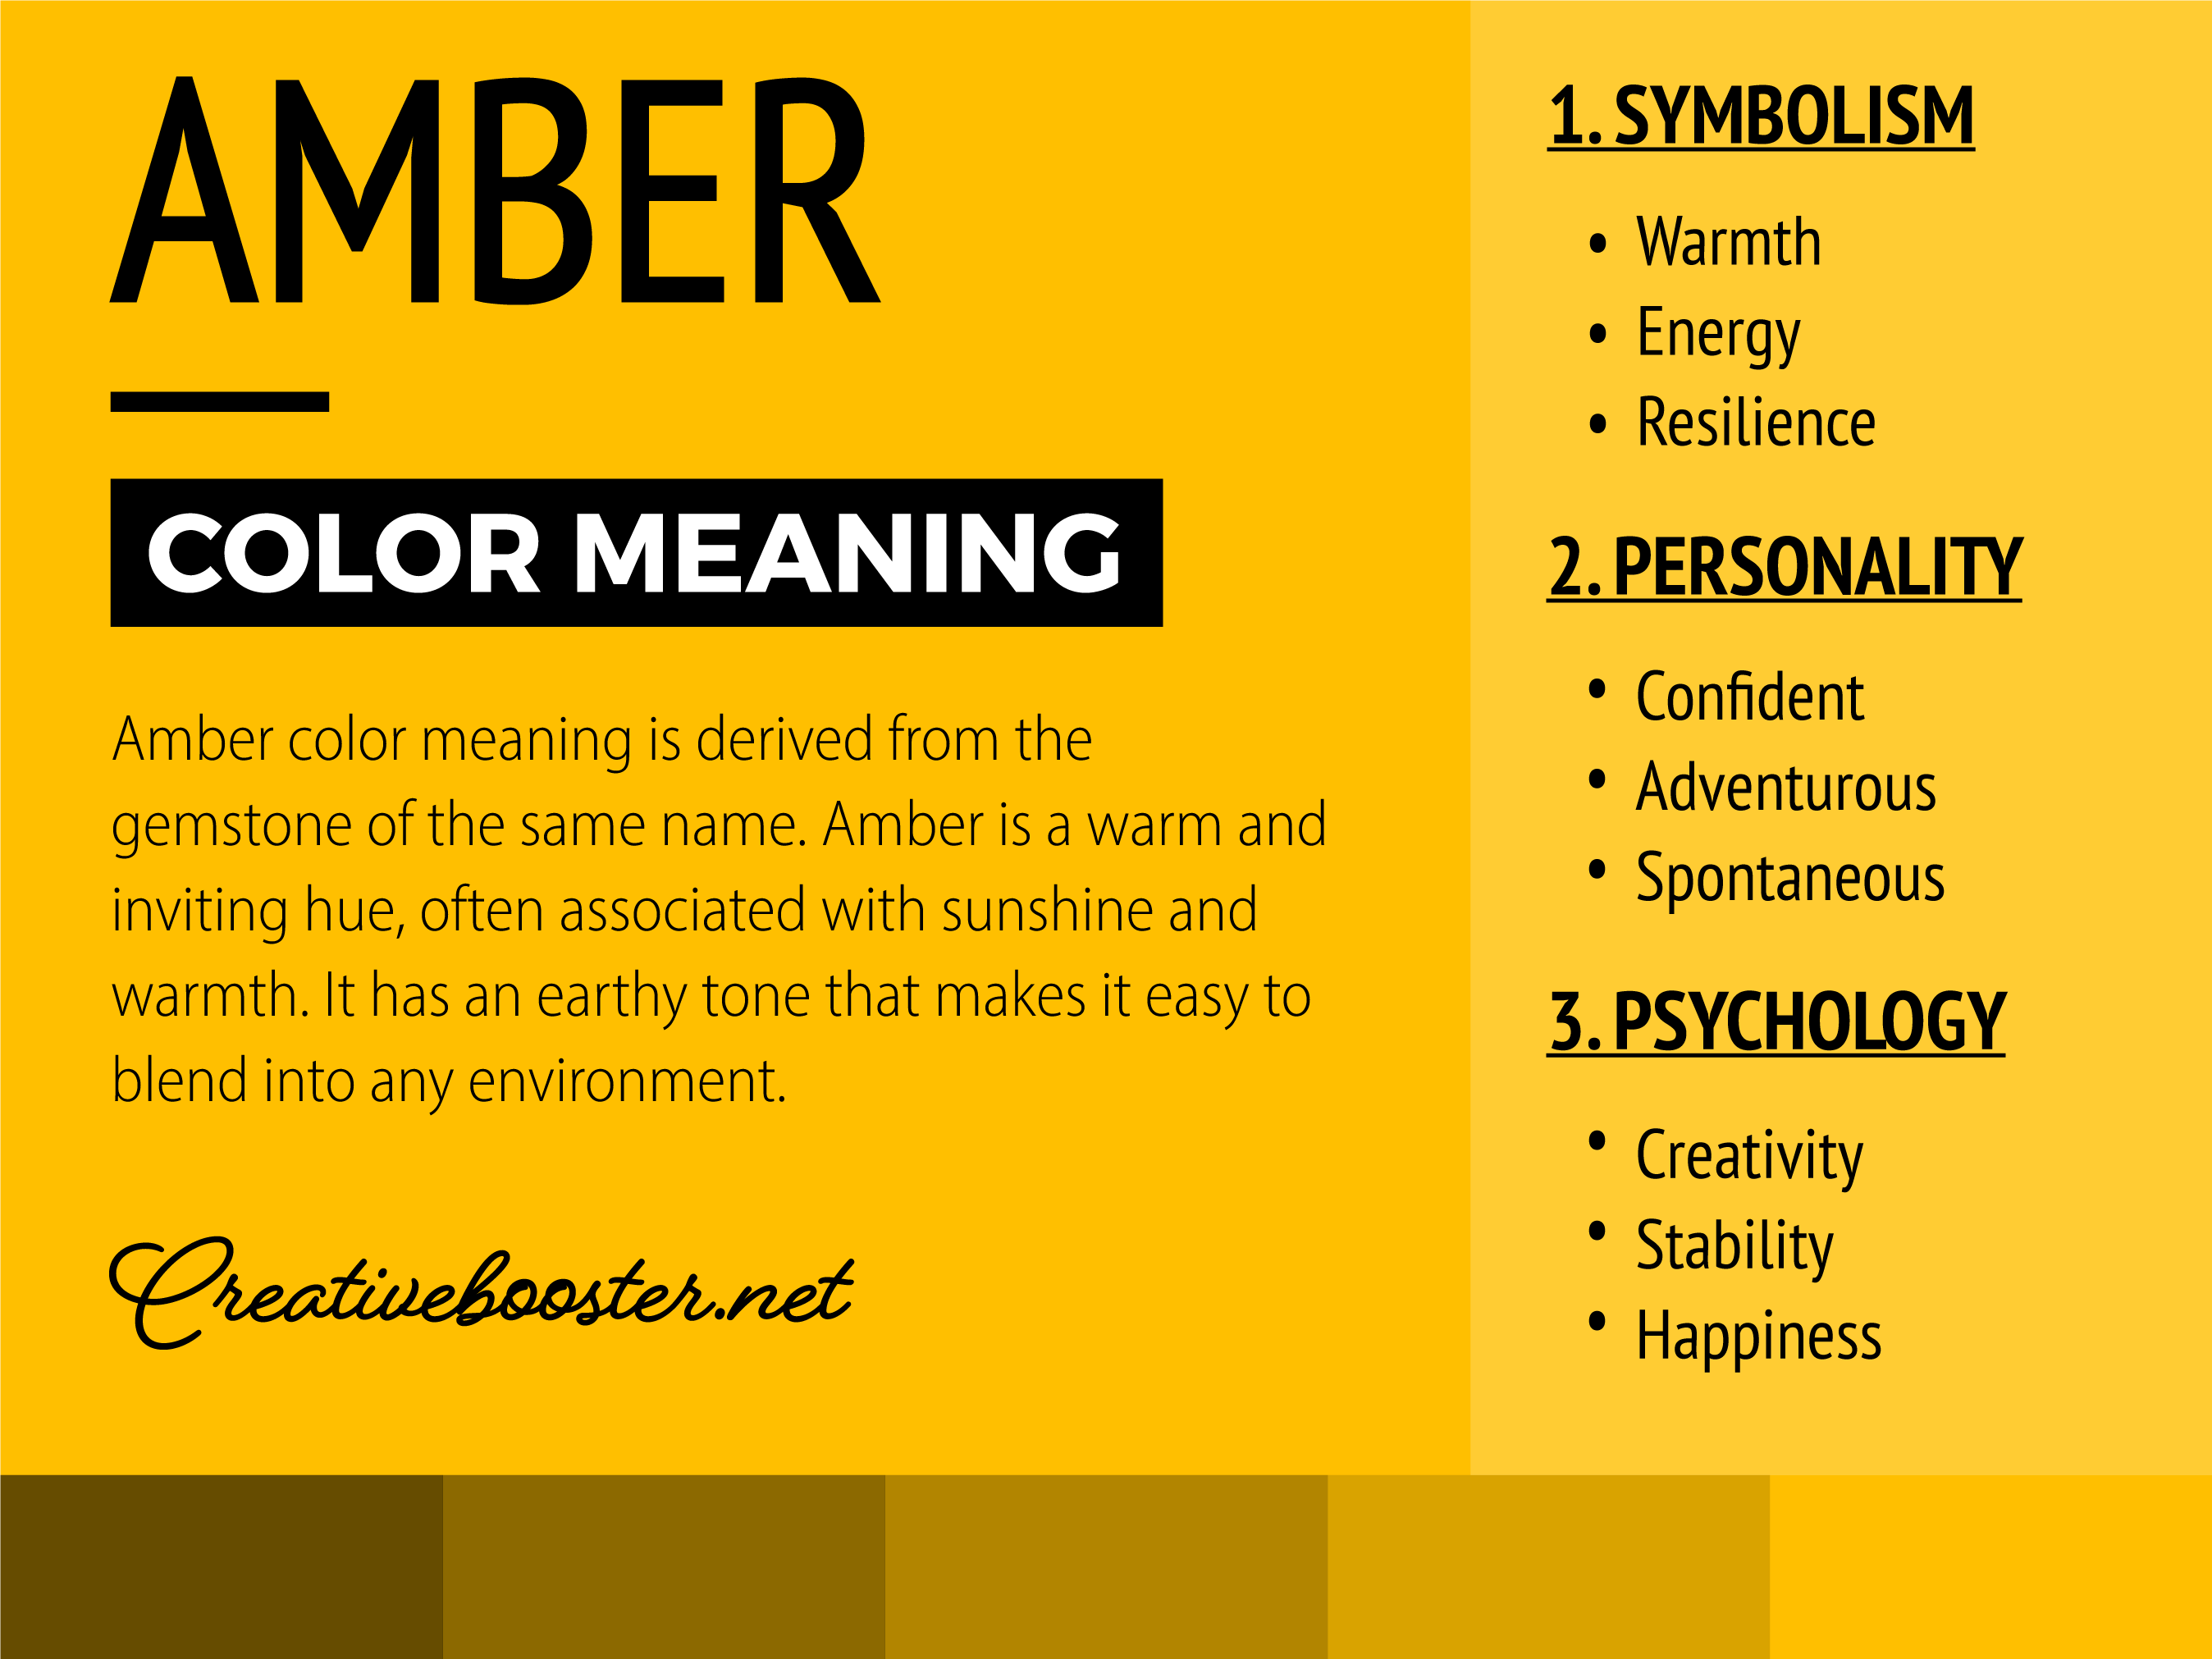 what each color means for personality